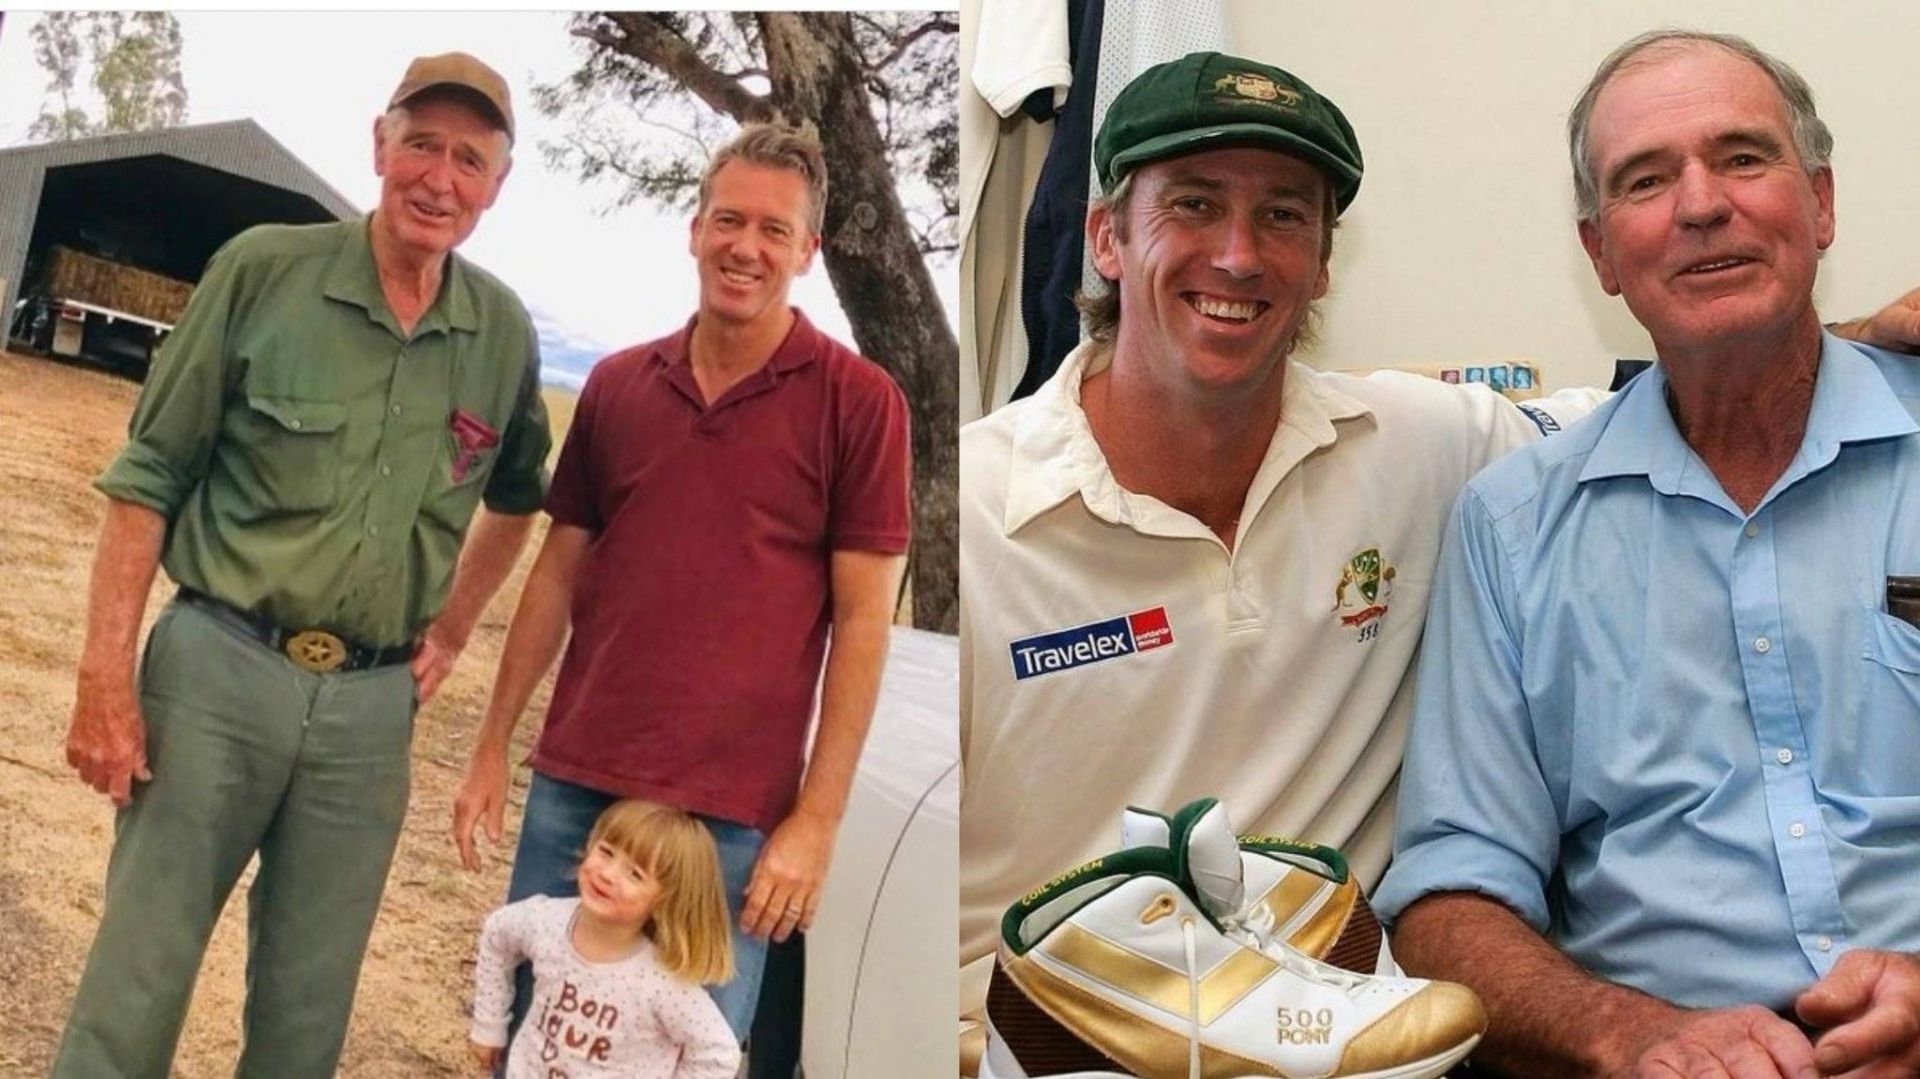 Glenn McGrath was very close to his father (Image: Instagram)